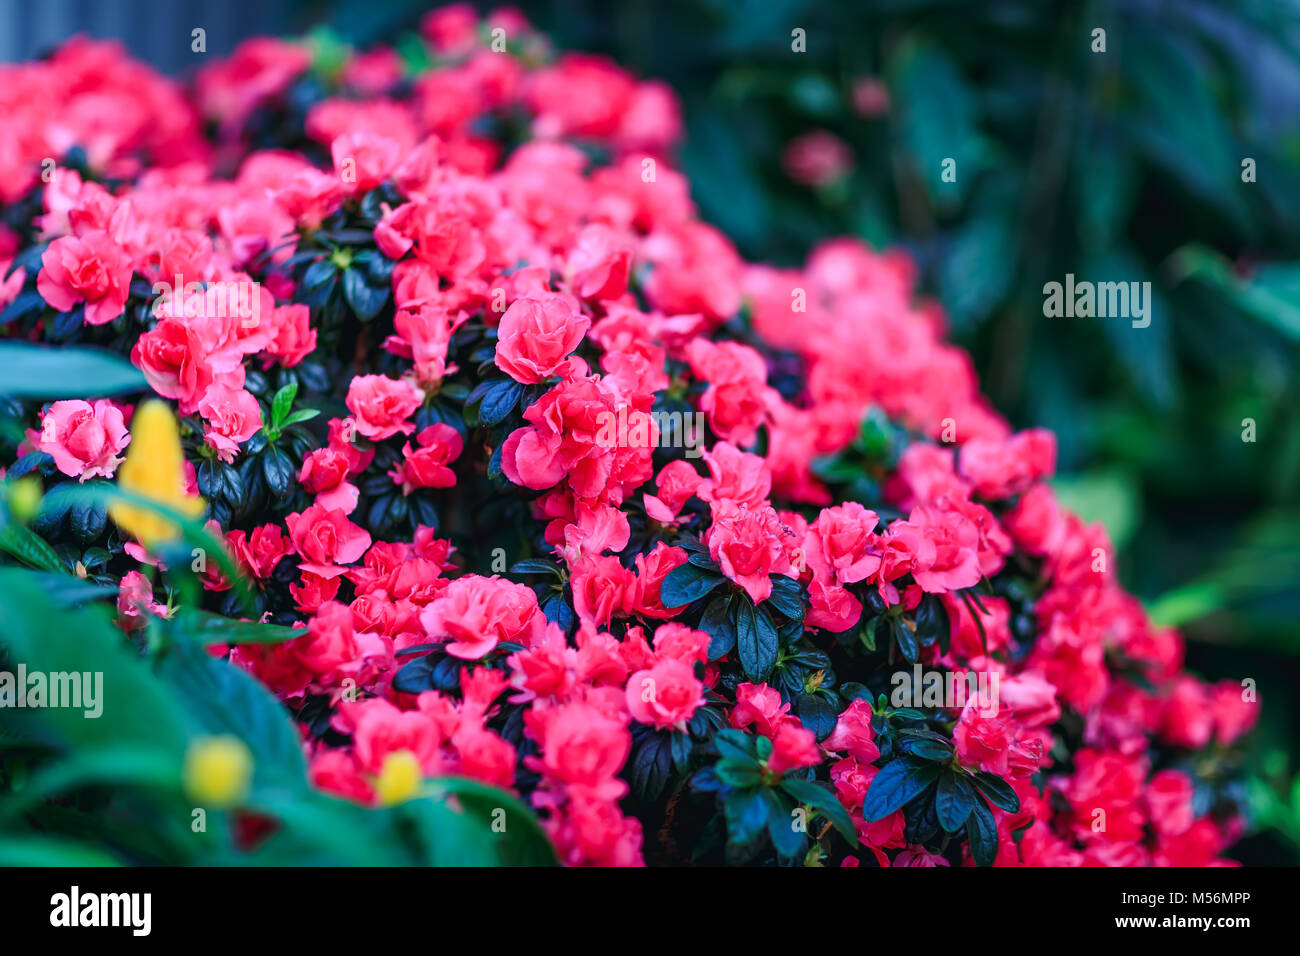 Gorgeous begonia plants in amazing floral decor. Great red wax begonias flower background. Best picture of red floral decoration, with semperflorens. Stock Photo